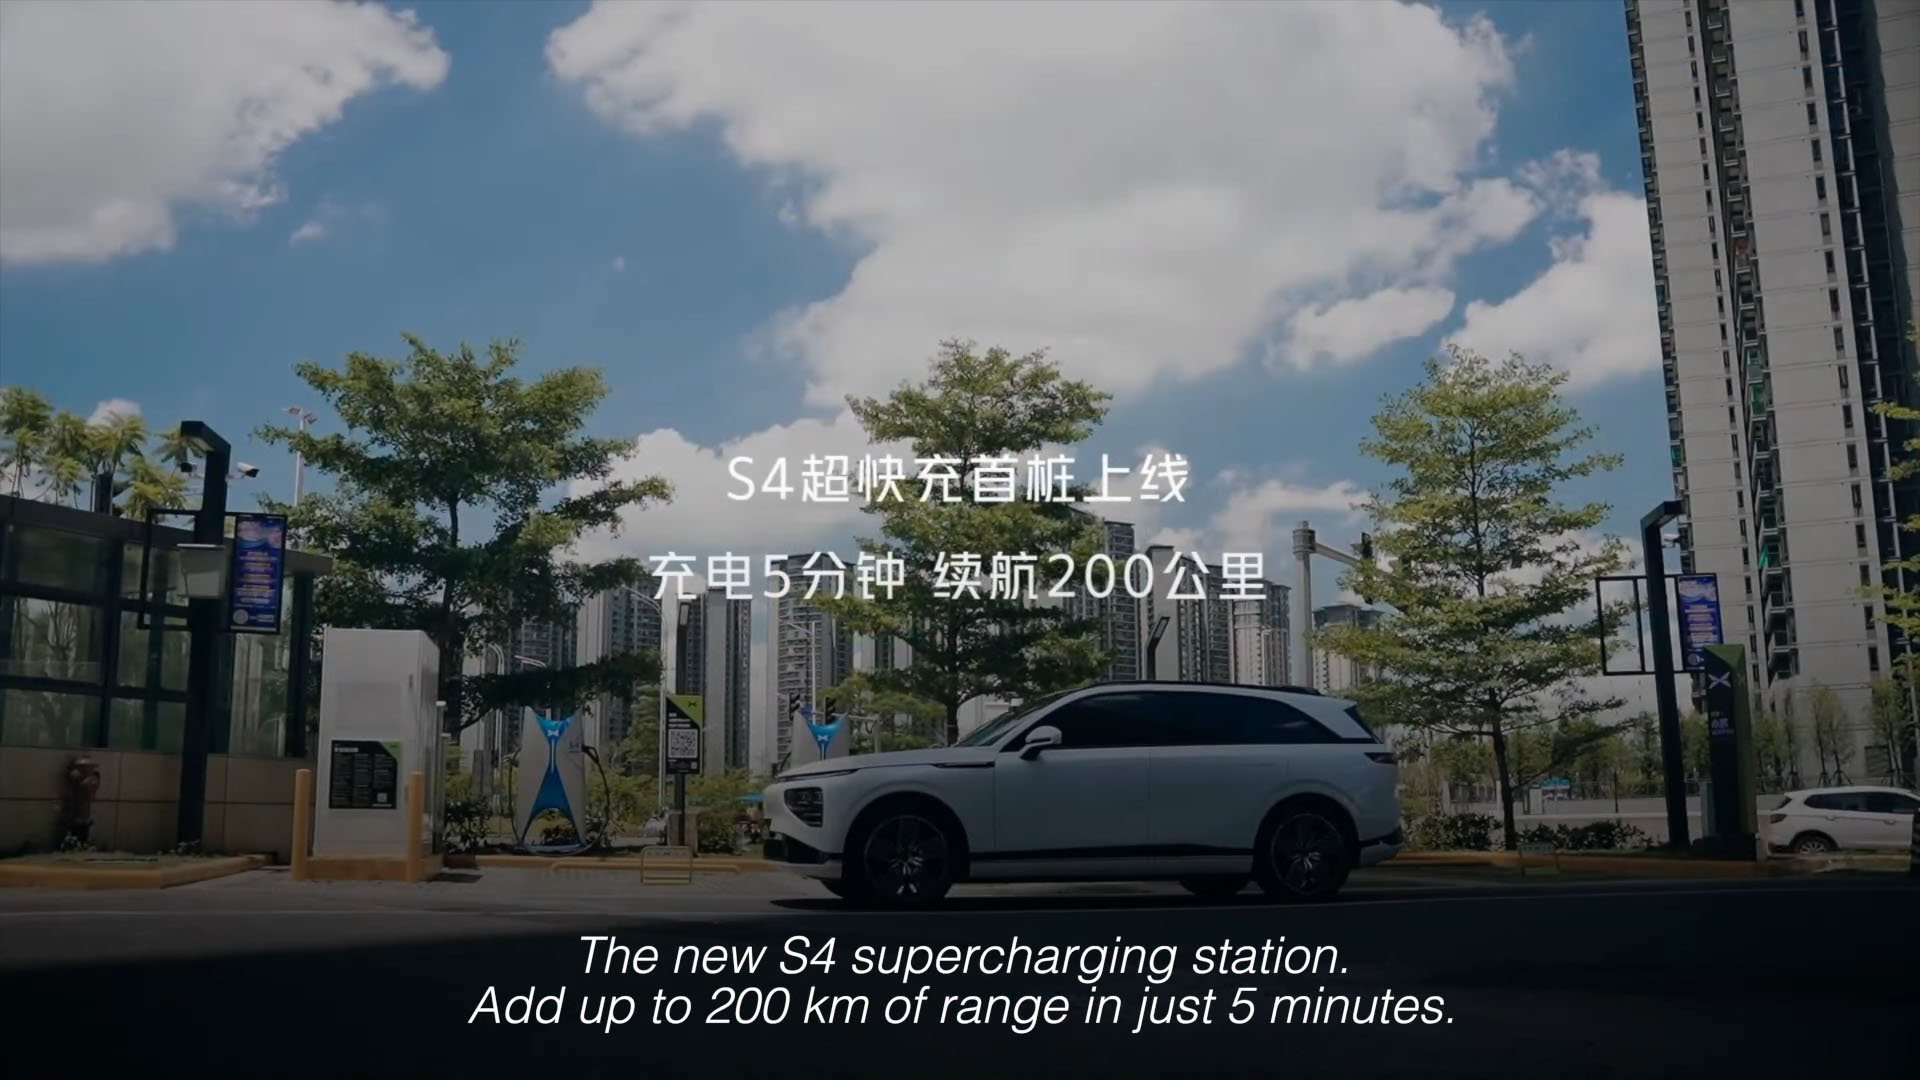 World’s fastest commercial EV charging stations go live in several cities